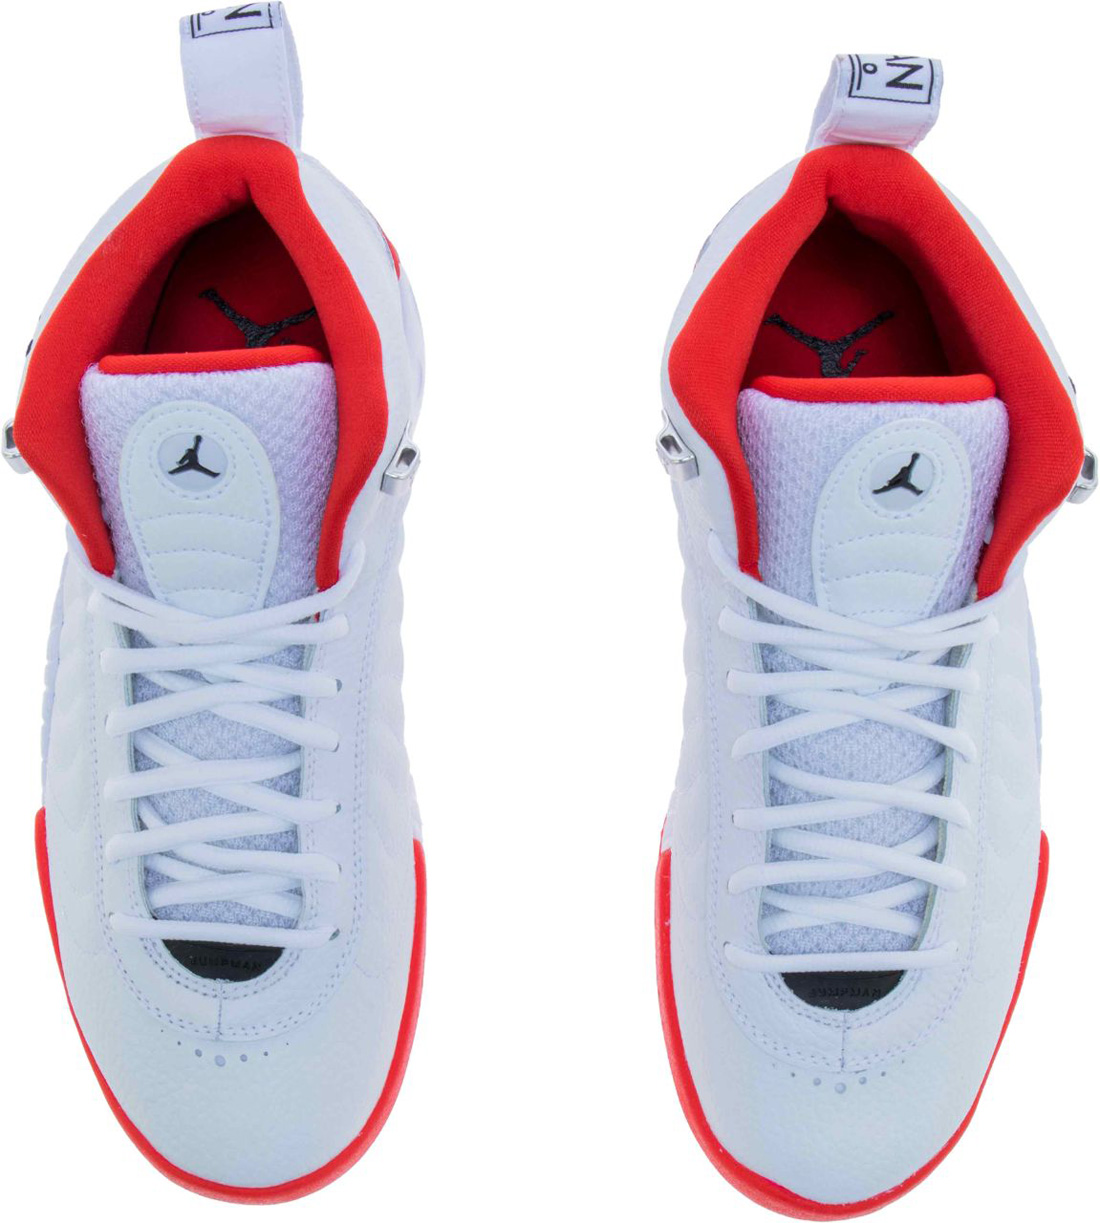 The Jordan Jumpman Pro is Available Now 